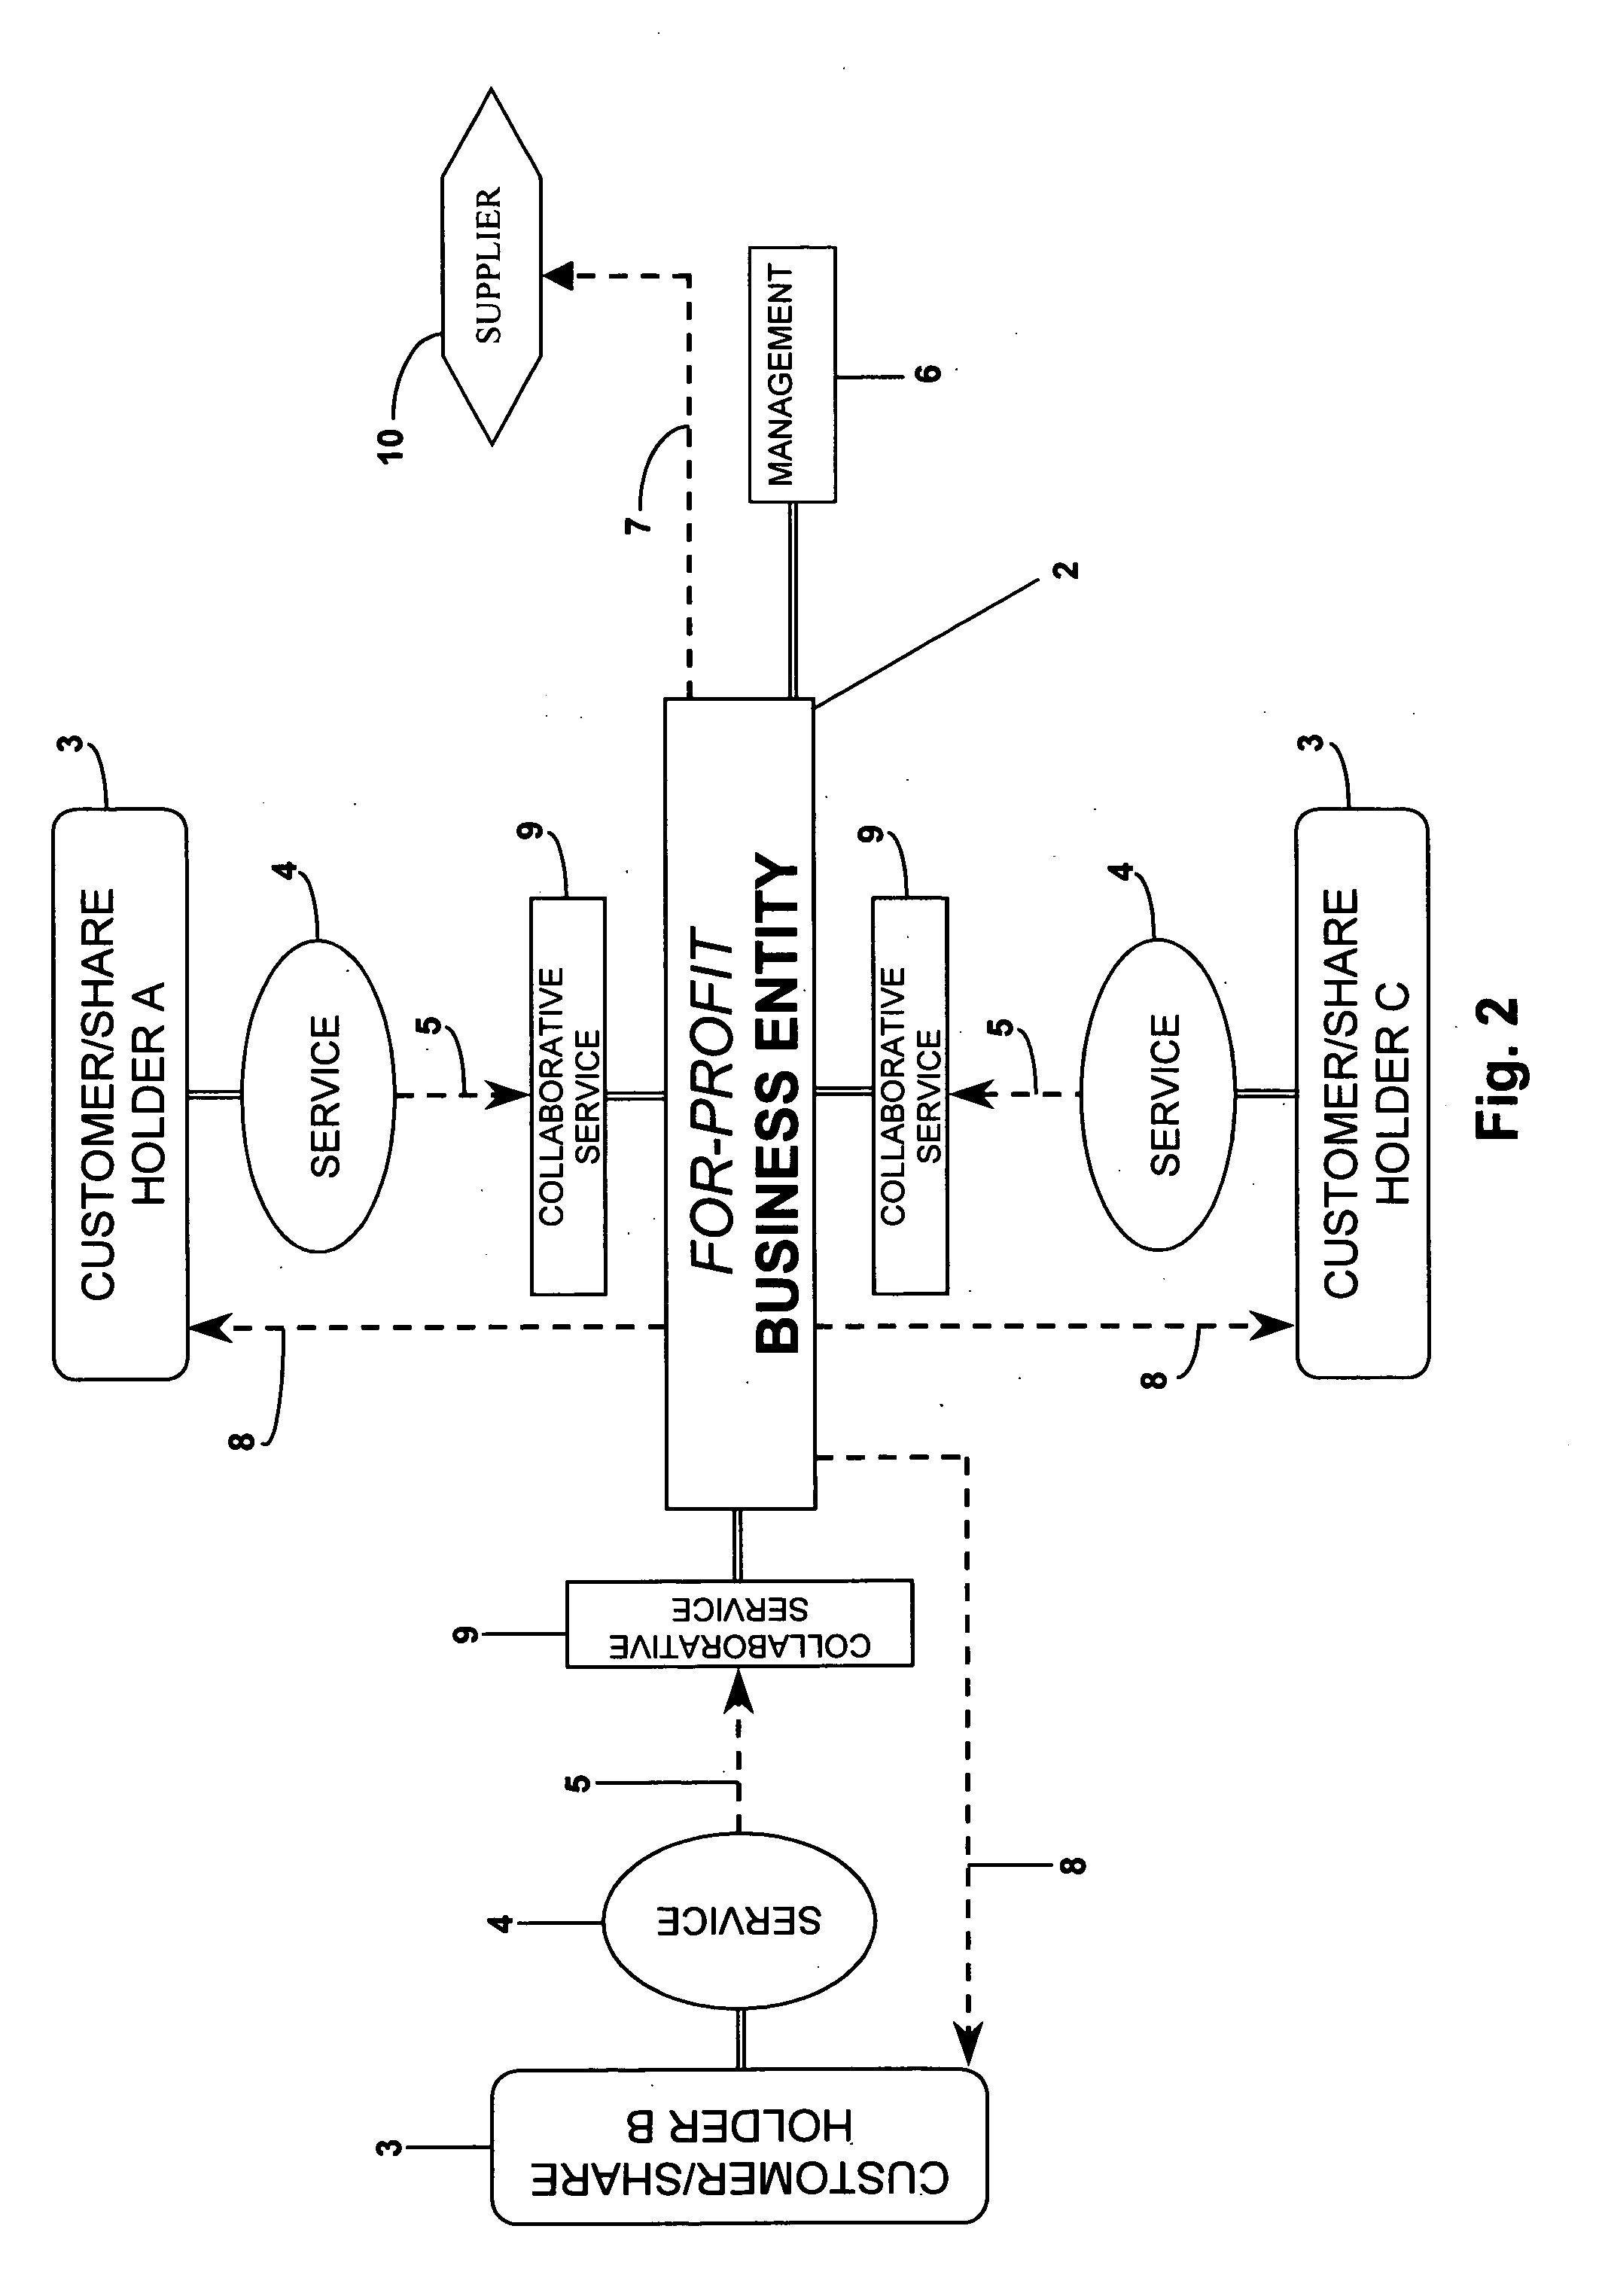 Collaborative shared services business system, business processes and method thereof